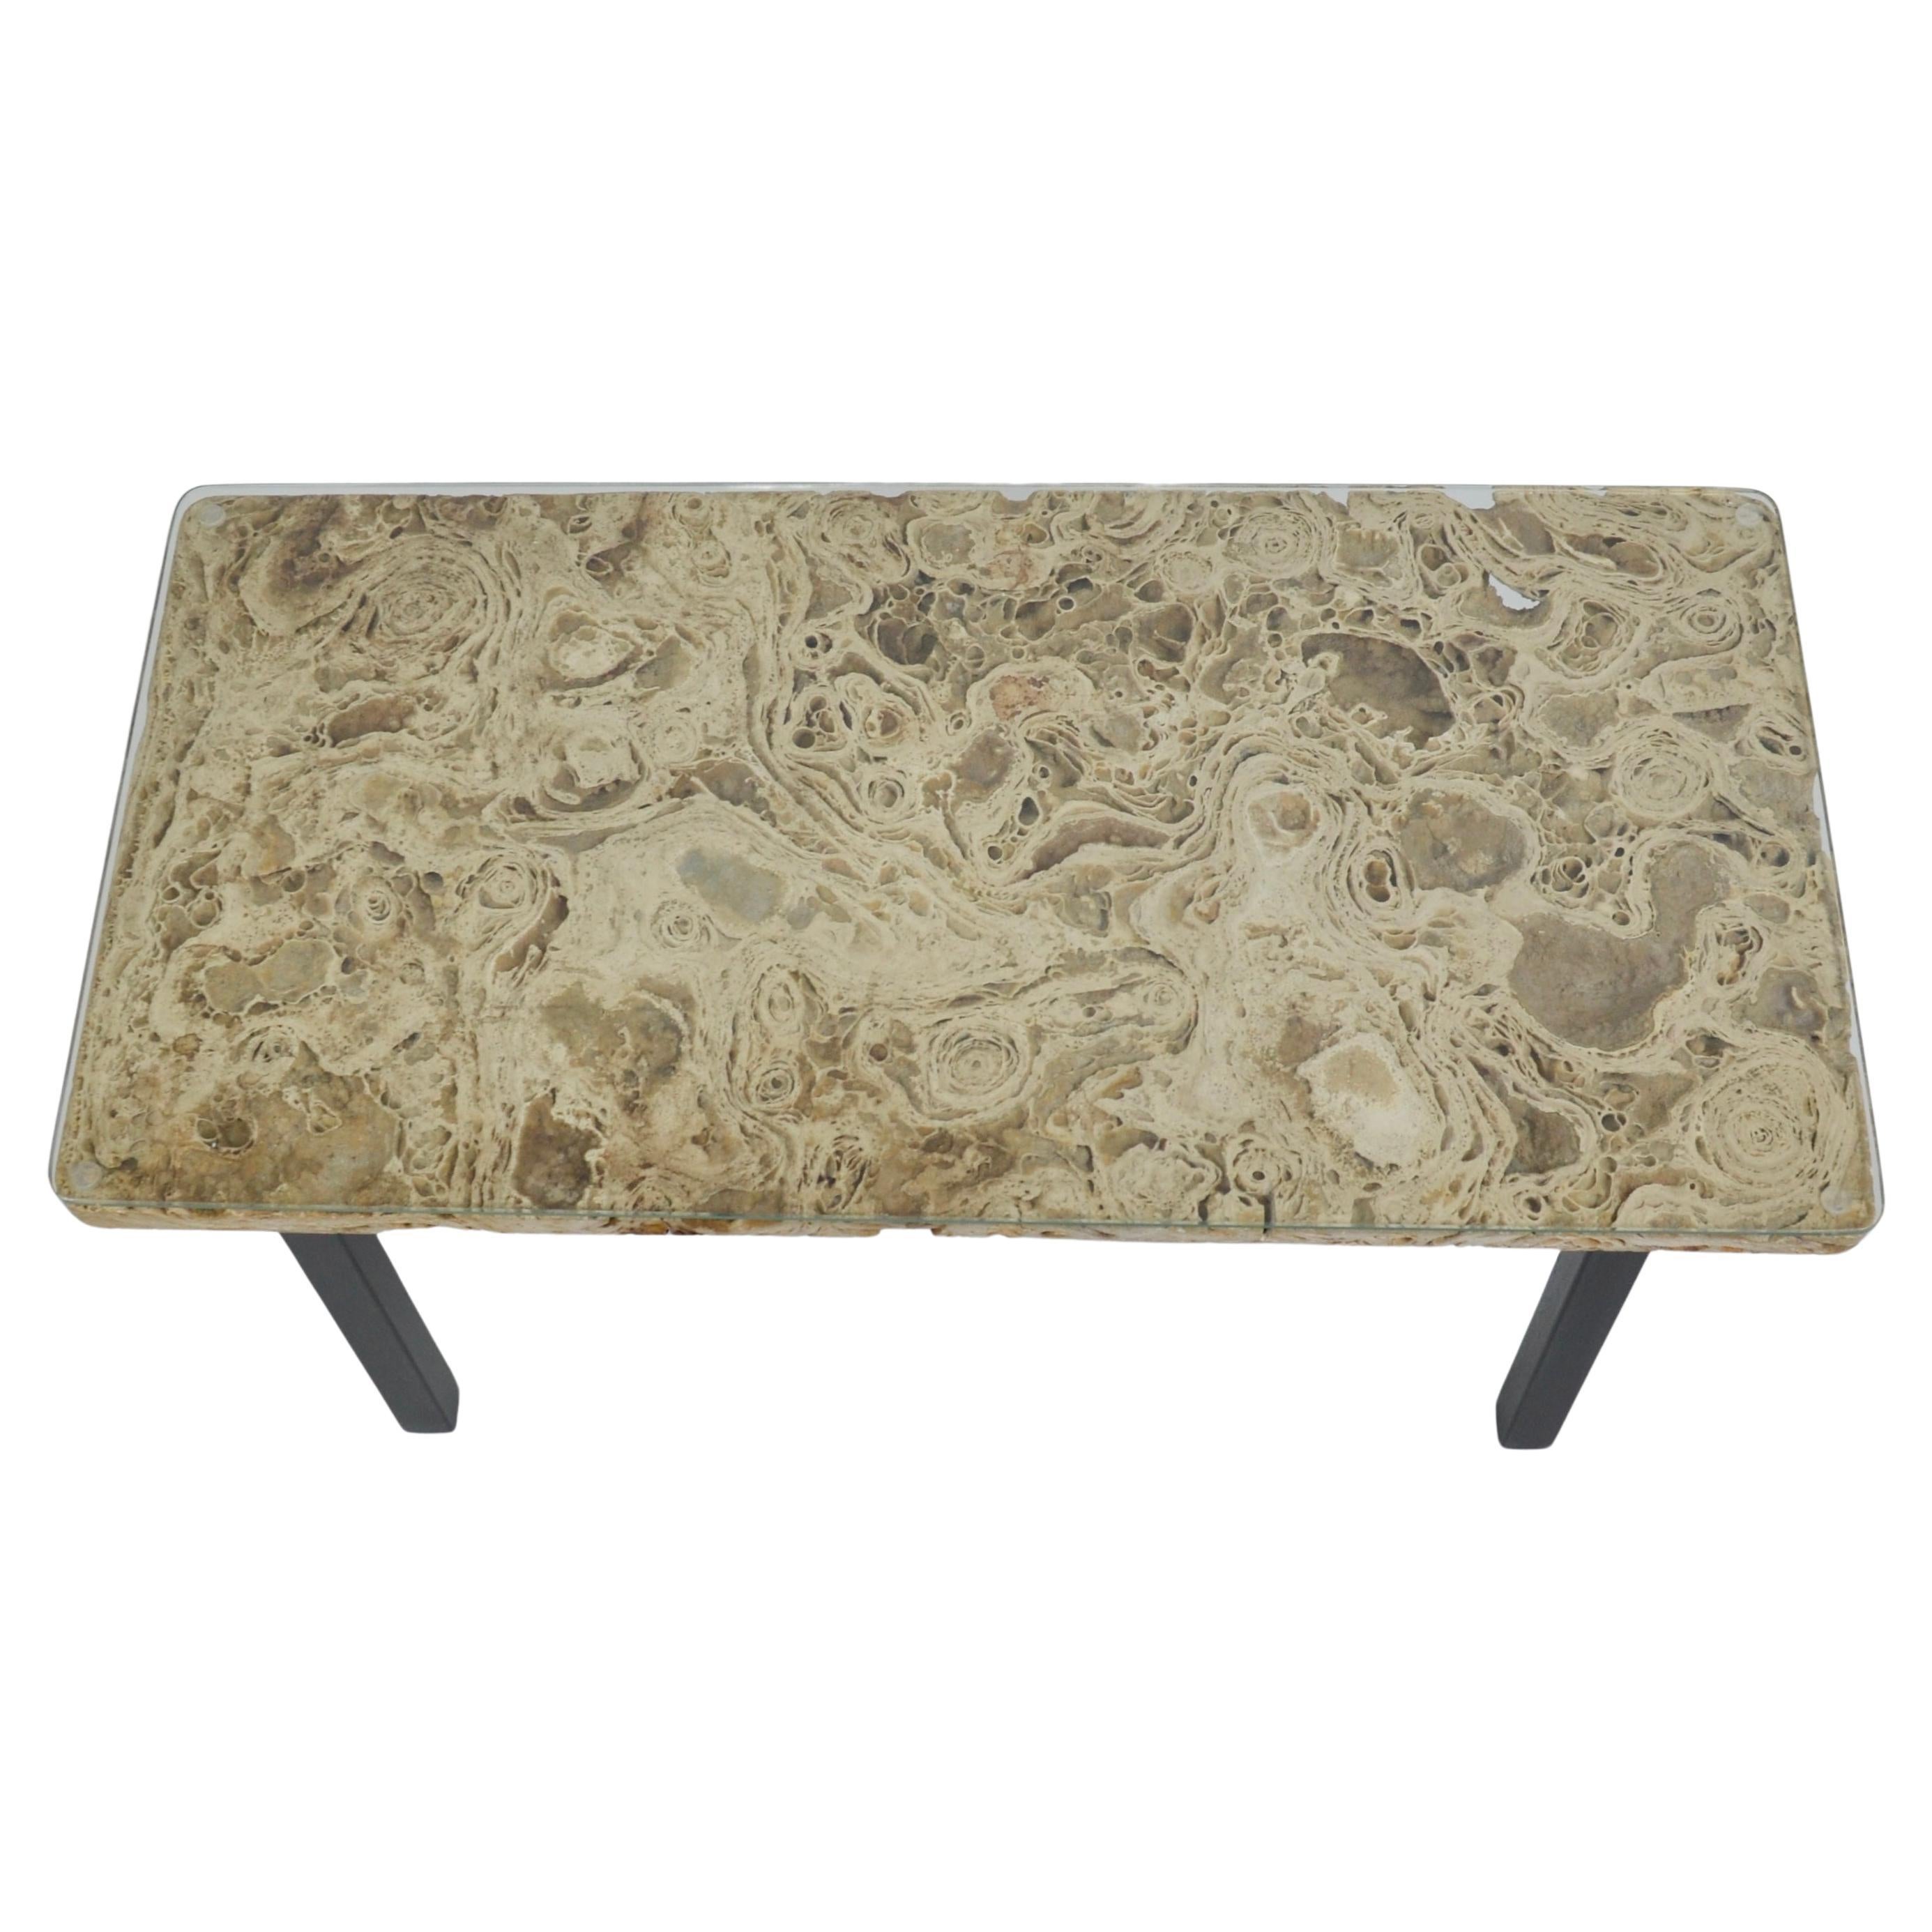 Vintage travertine and glass coffee table For Sale